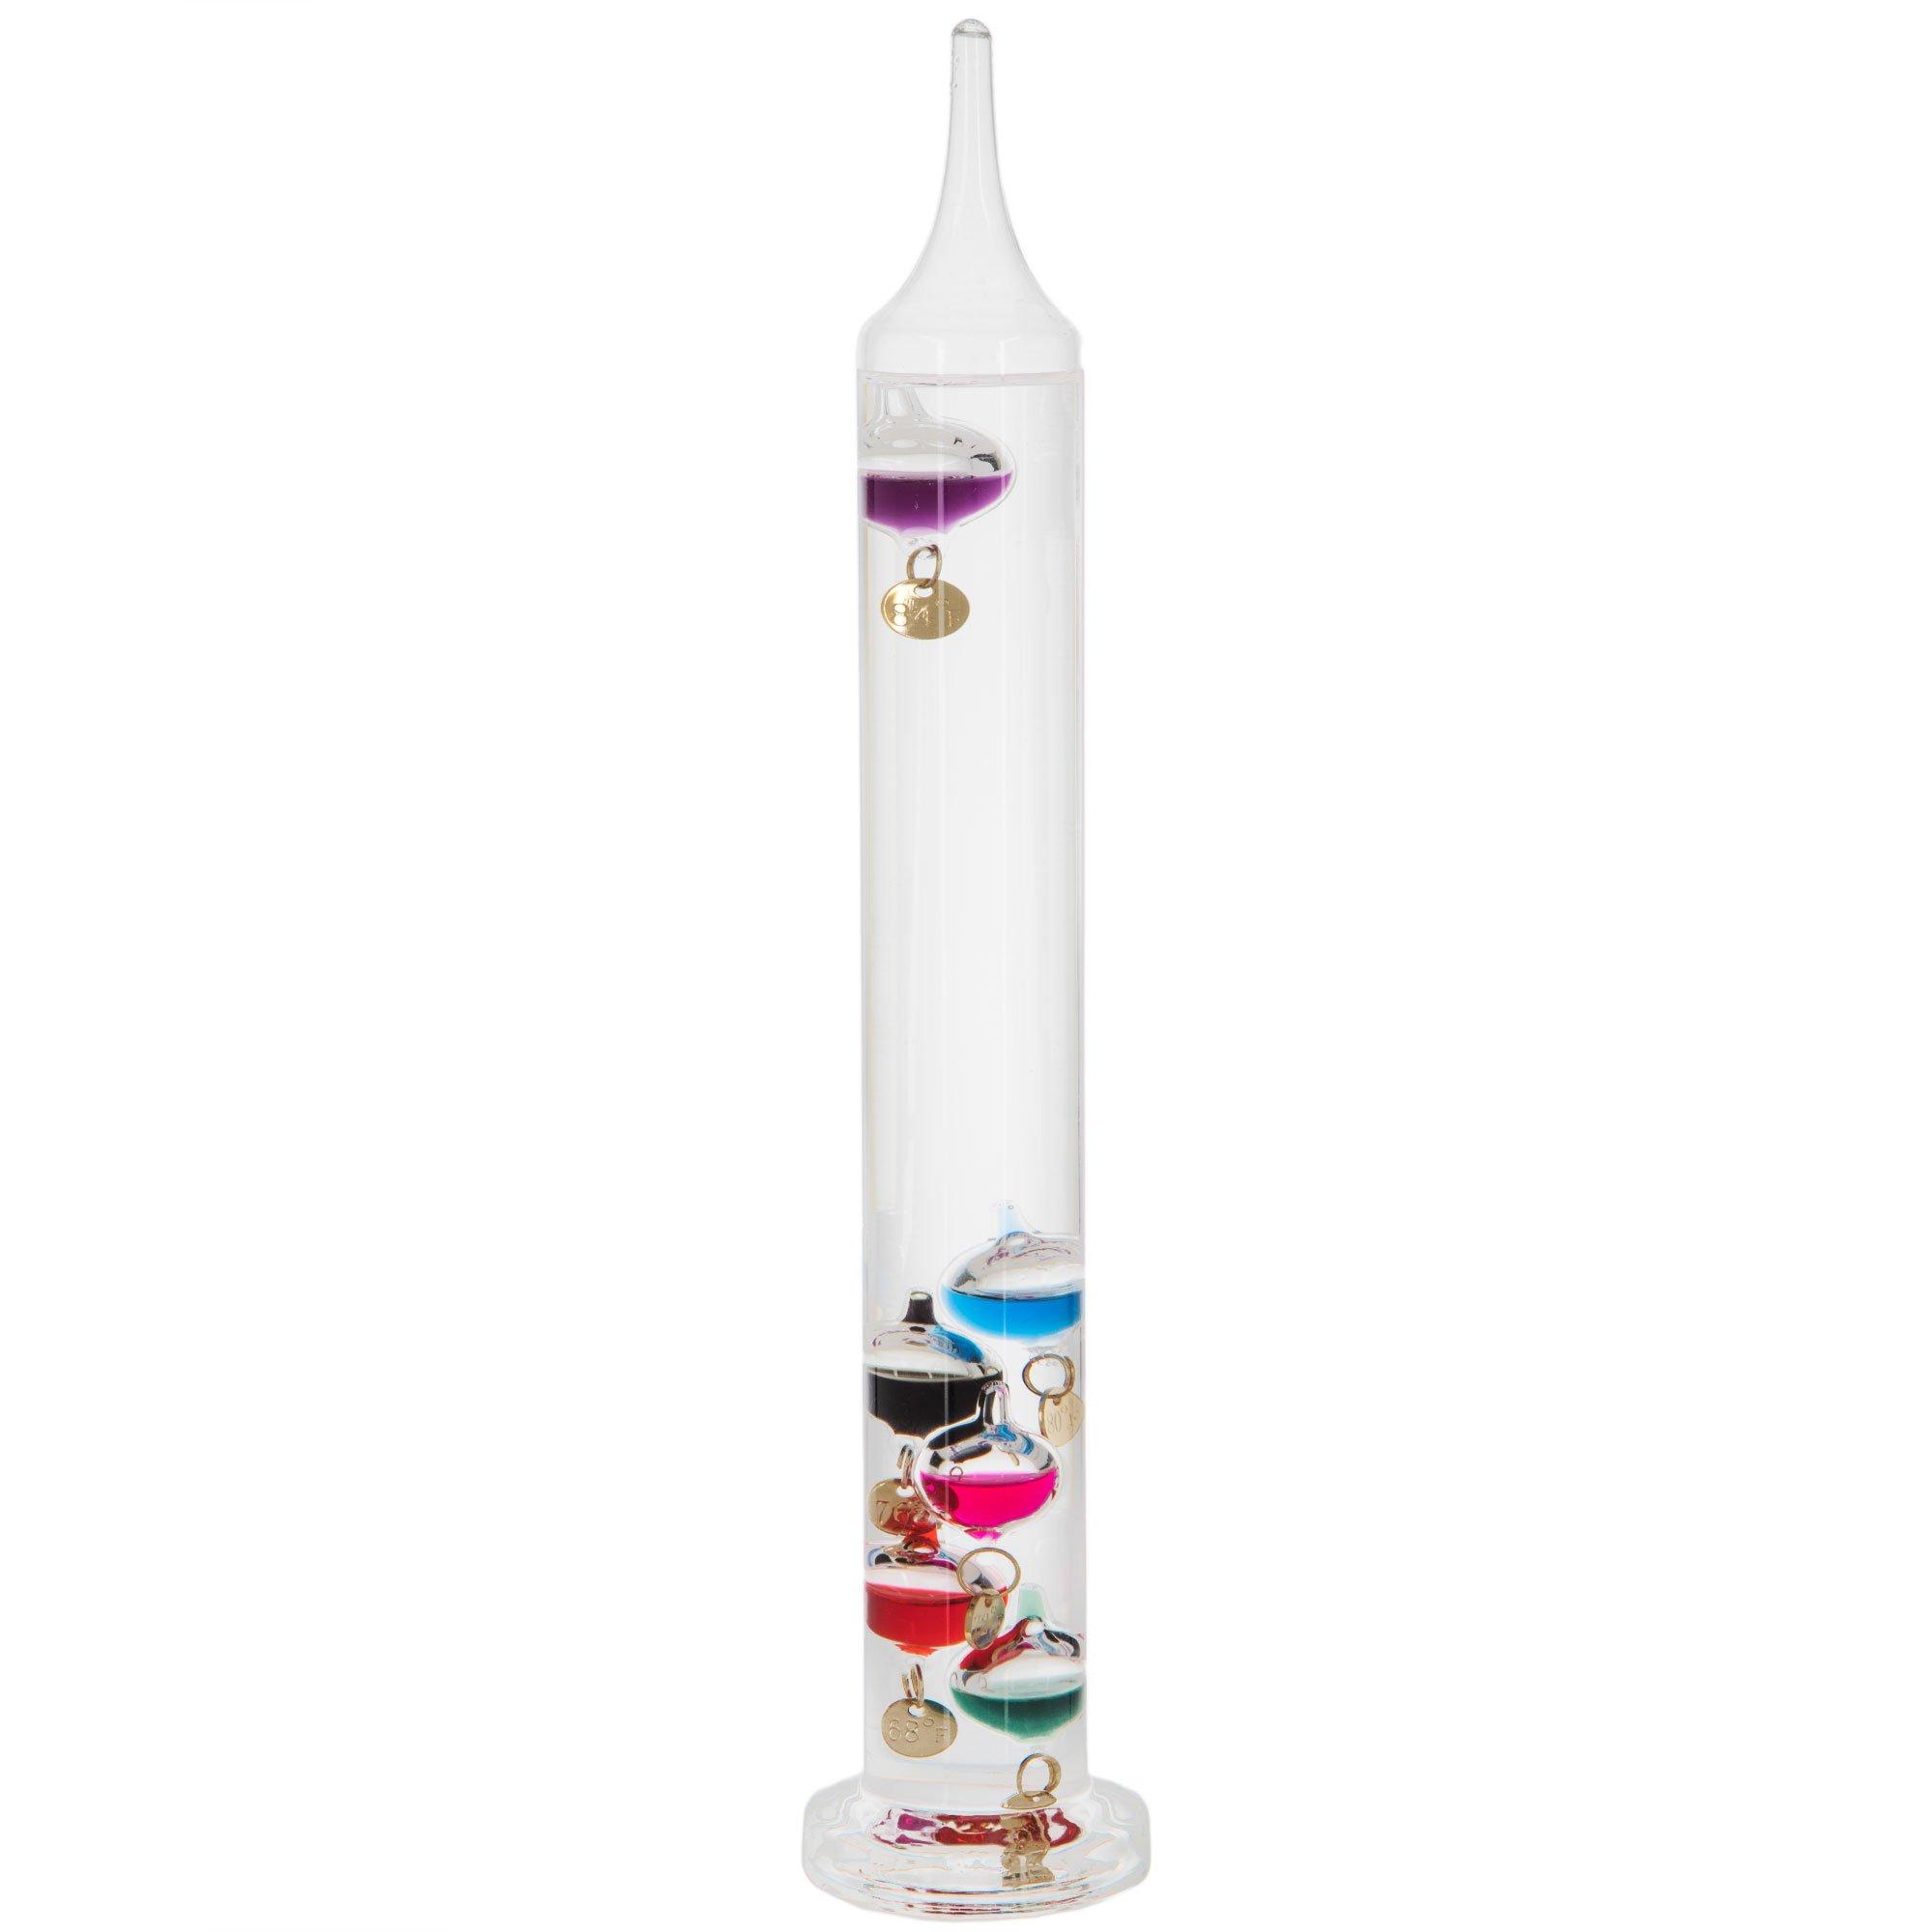 Hanging Galileo Thermometer in Wood Frame